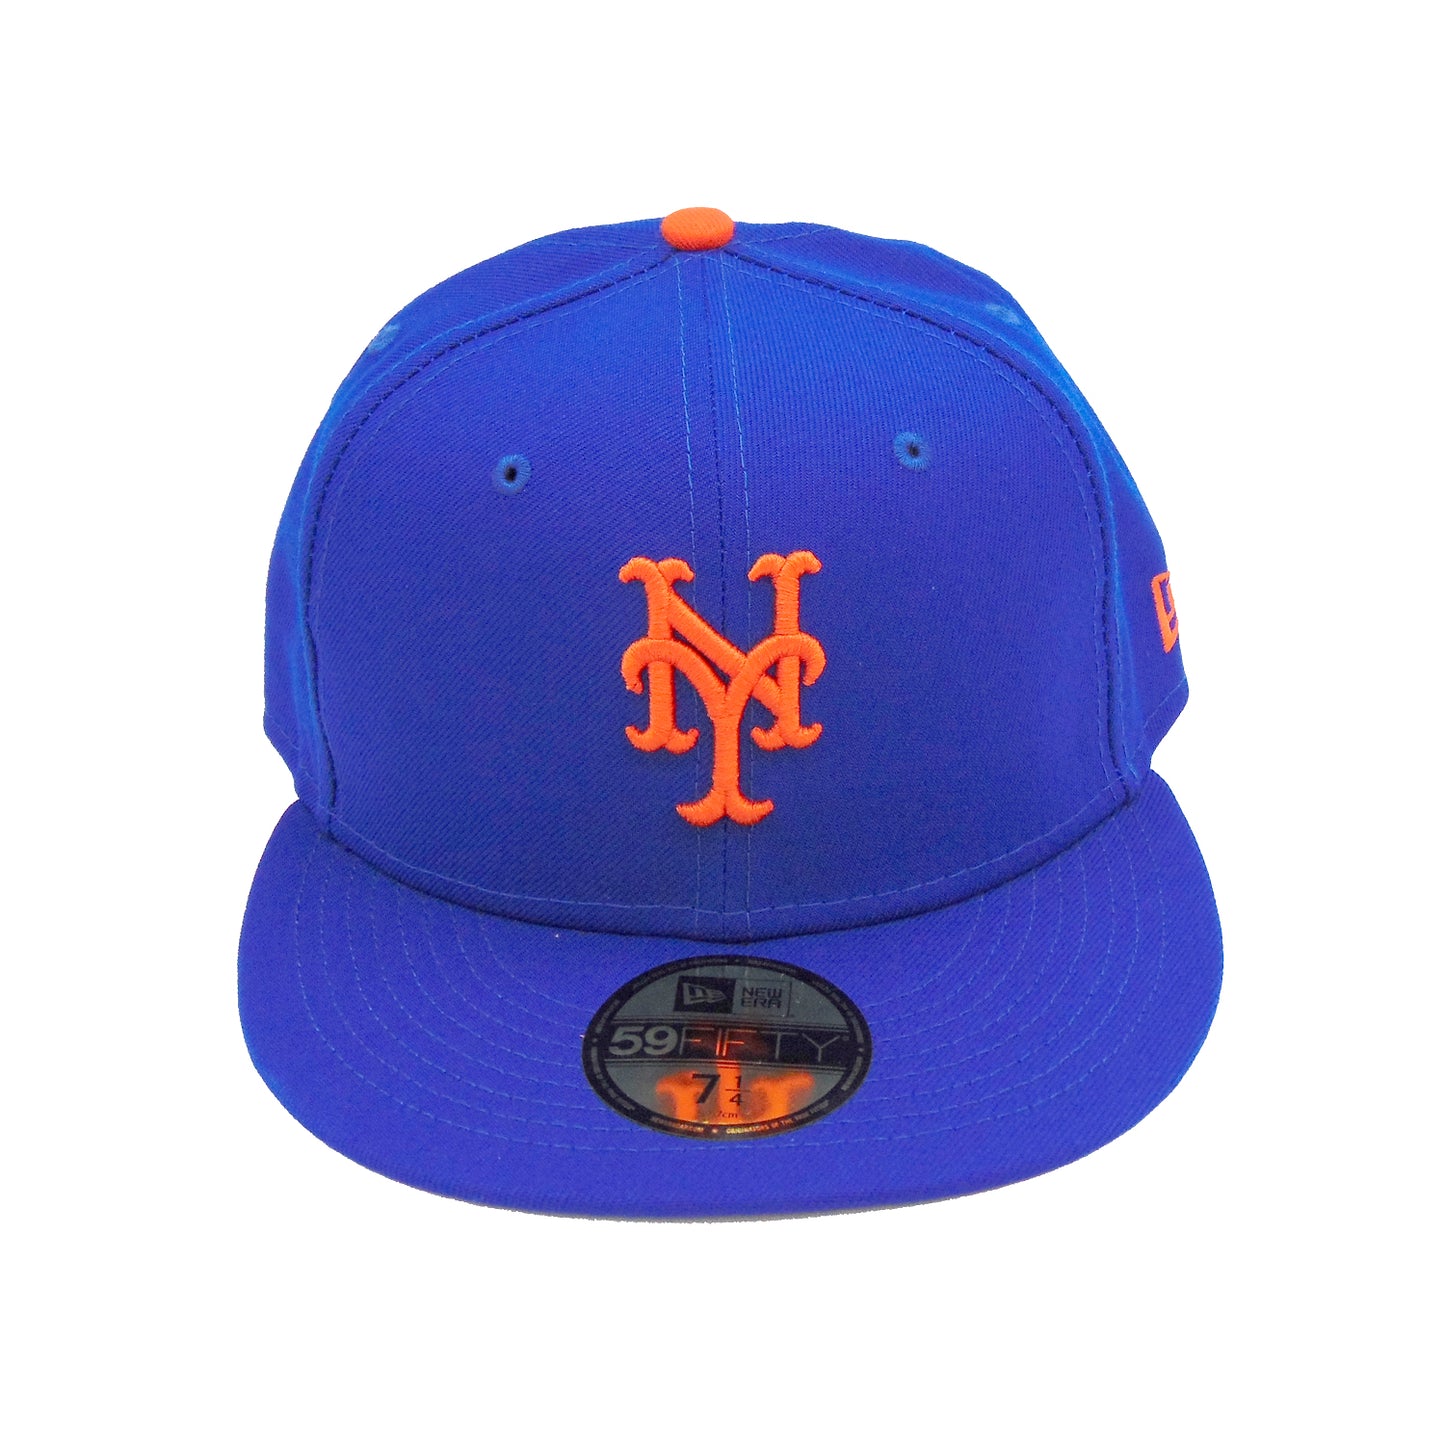 New York Mets Authentic New Era 59FIFTY Cap Royal